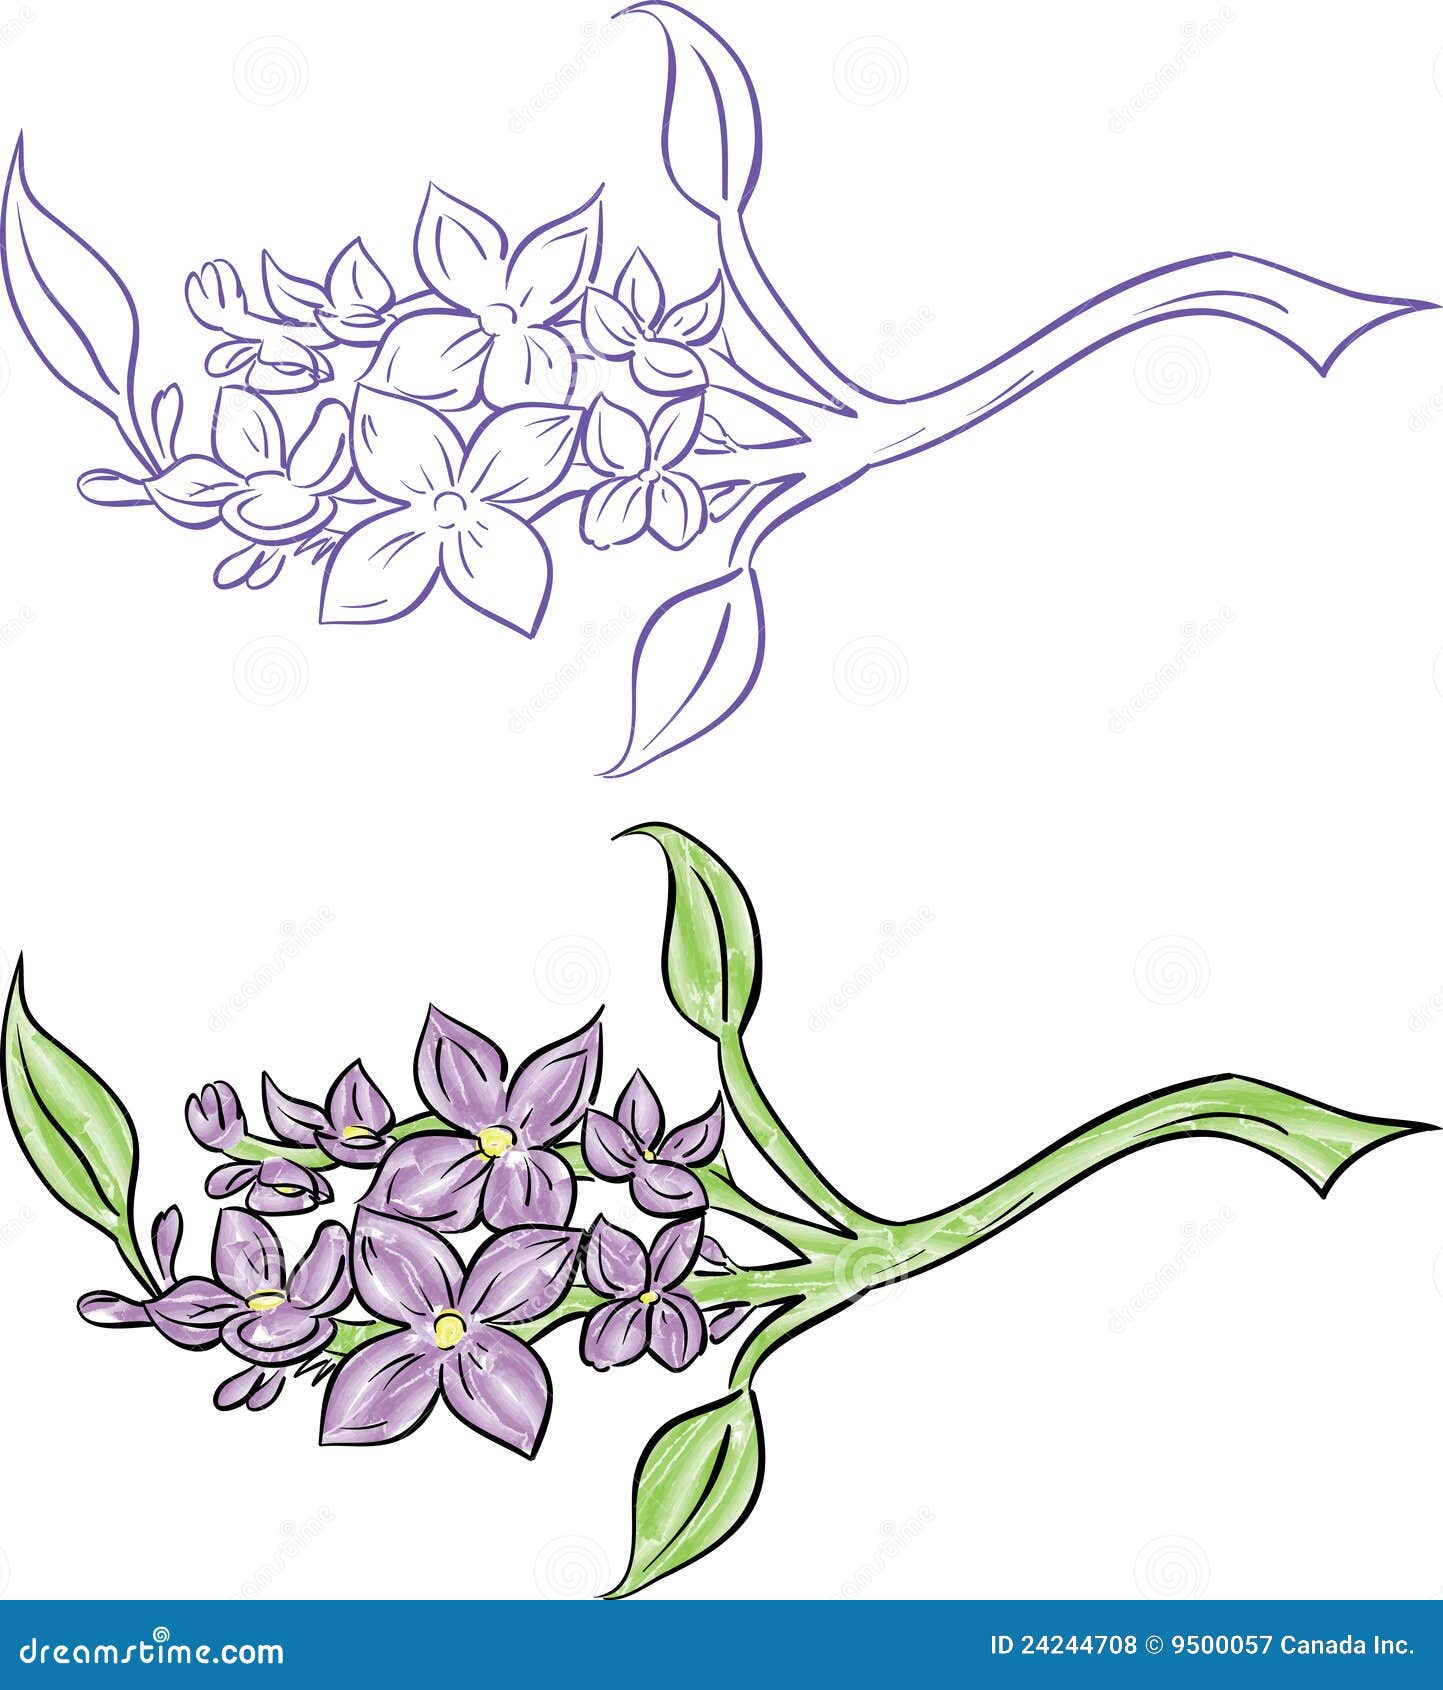 Lilac branch stock vector. Illustration of drawing leaves 